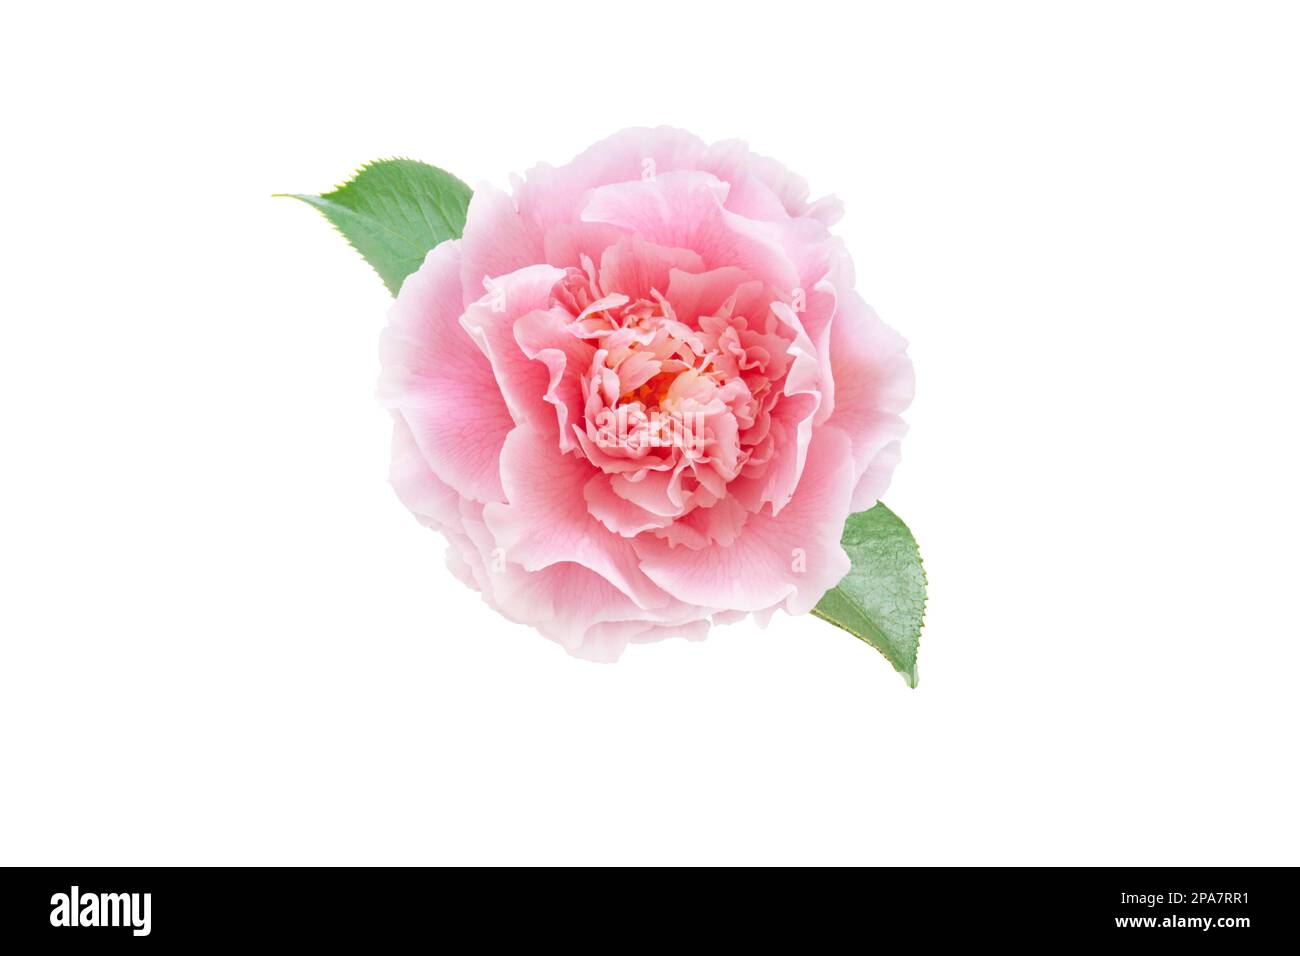 Pale pink camellia japonica peony form flower with green leaves isolated on white. Japanese tsubaki. Stock Photo